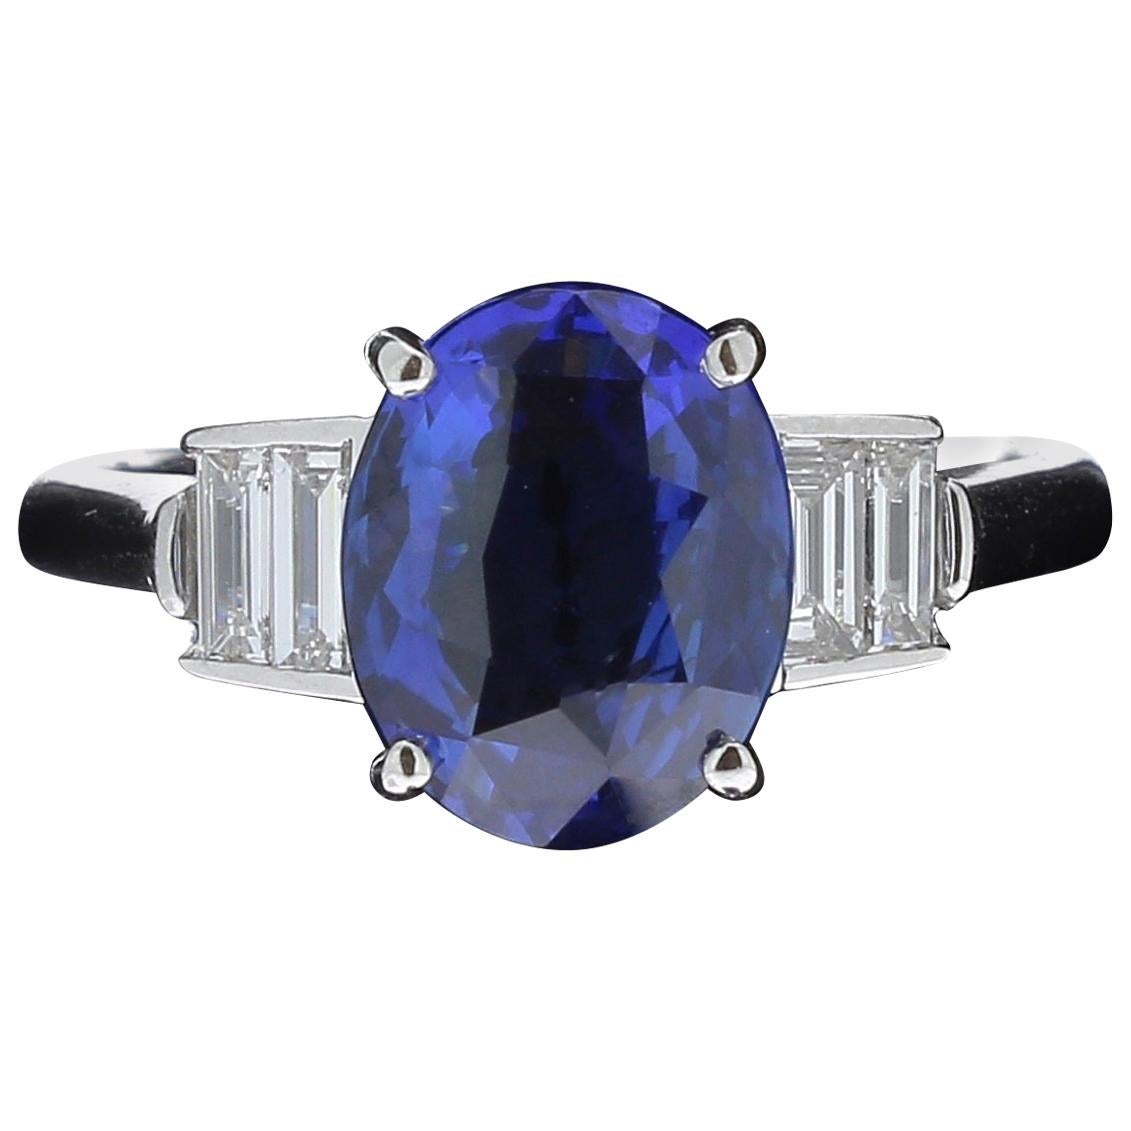 Certified 3.52 Carat Untreated Blue Sapphire and Diamond Rings